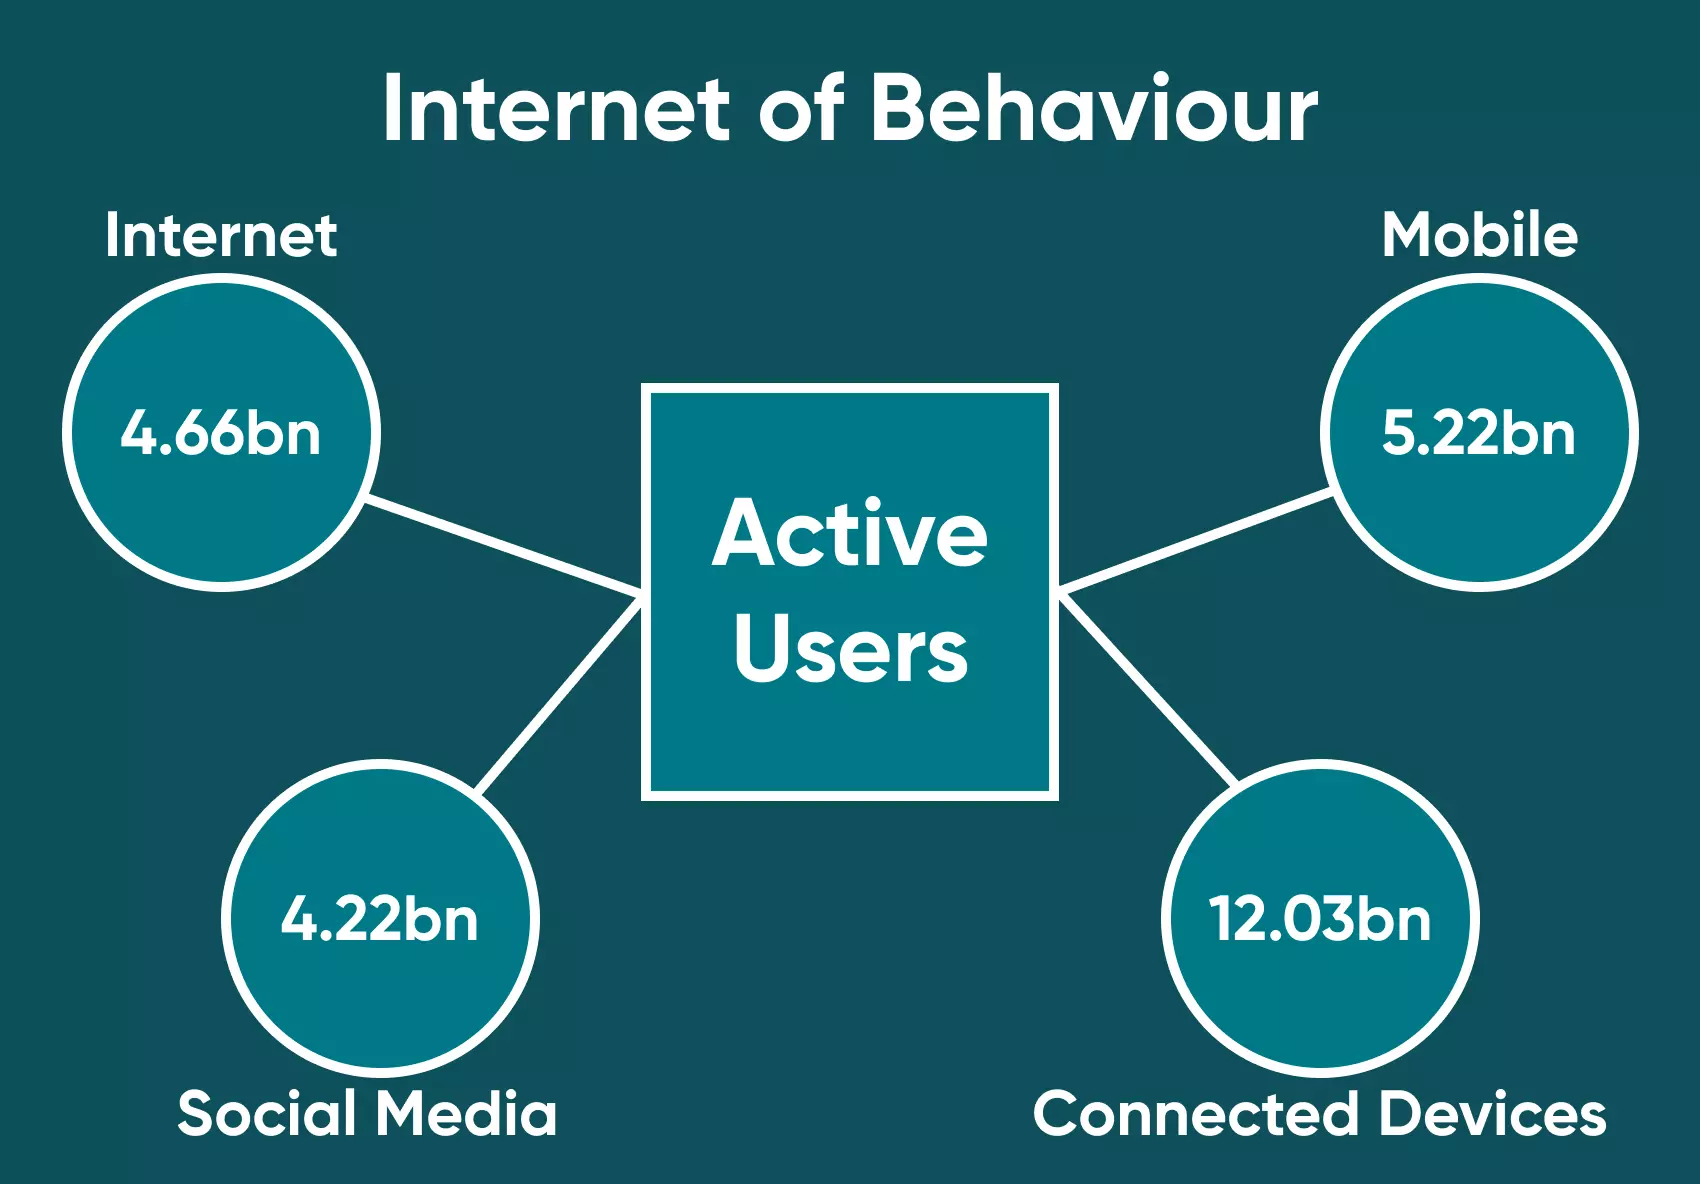 An outline of the estimated active users within the Internet of Behaviour.